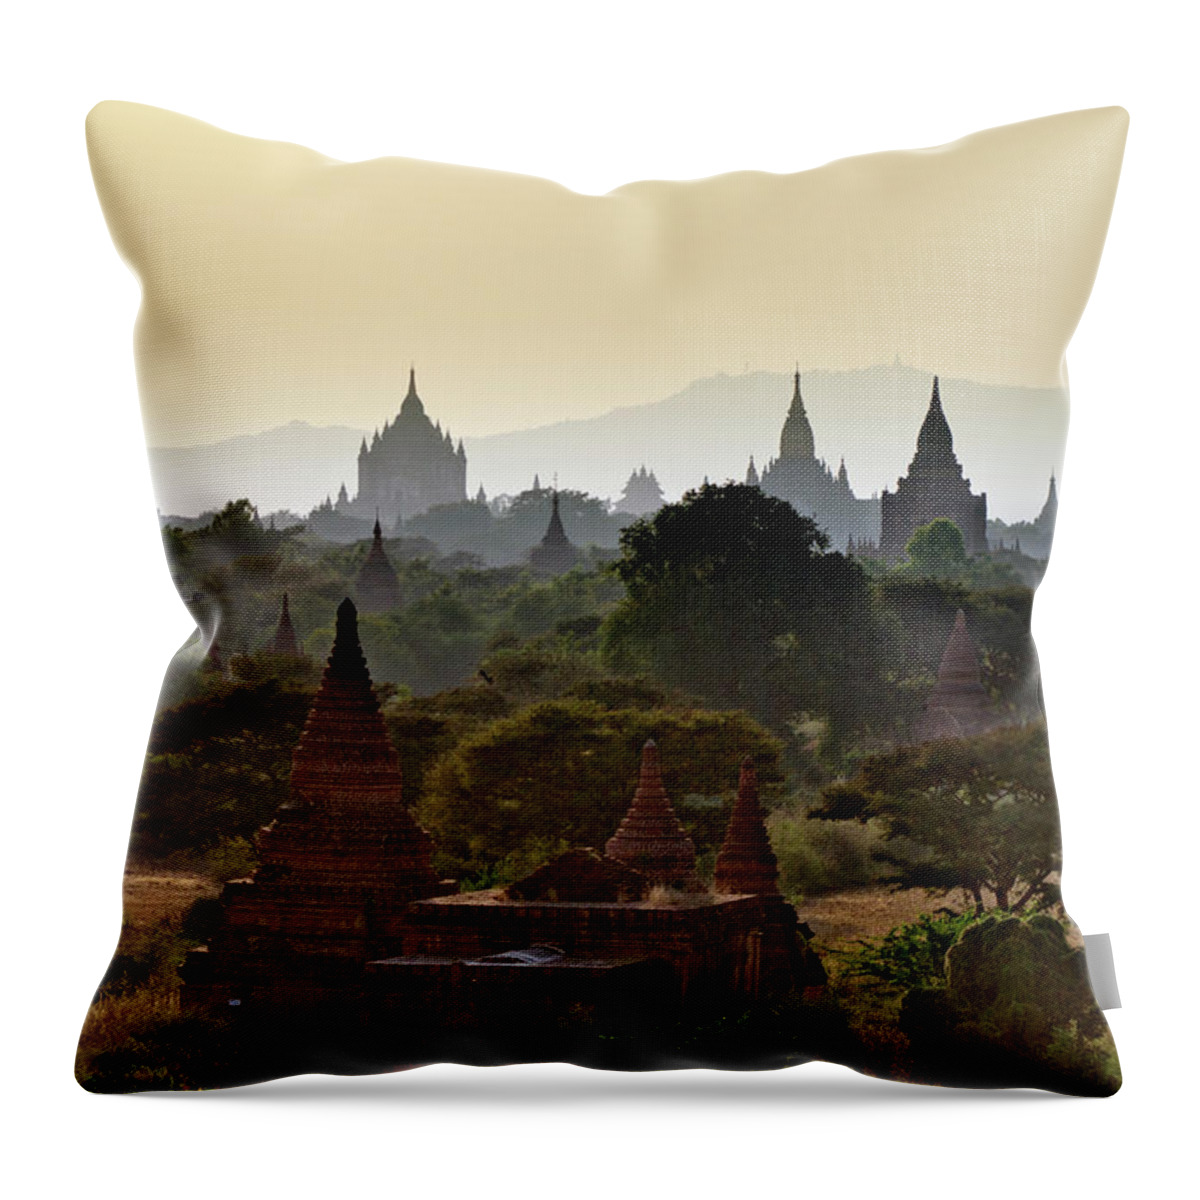 Tranquility Throw Pillow featuring the photograph Temples In Distant Haze At Sunset by Rwp Uk